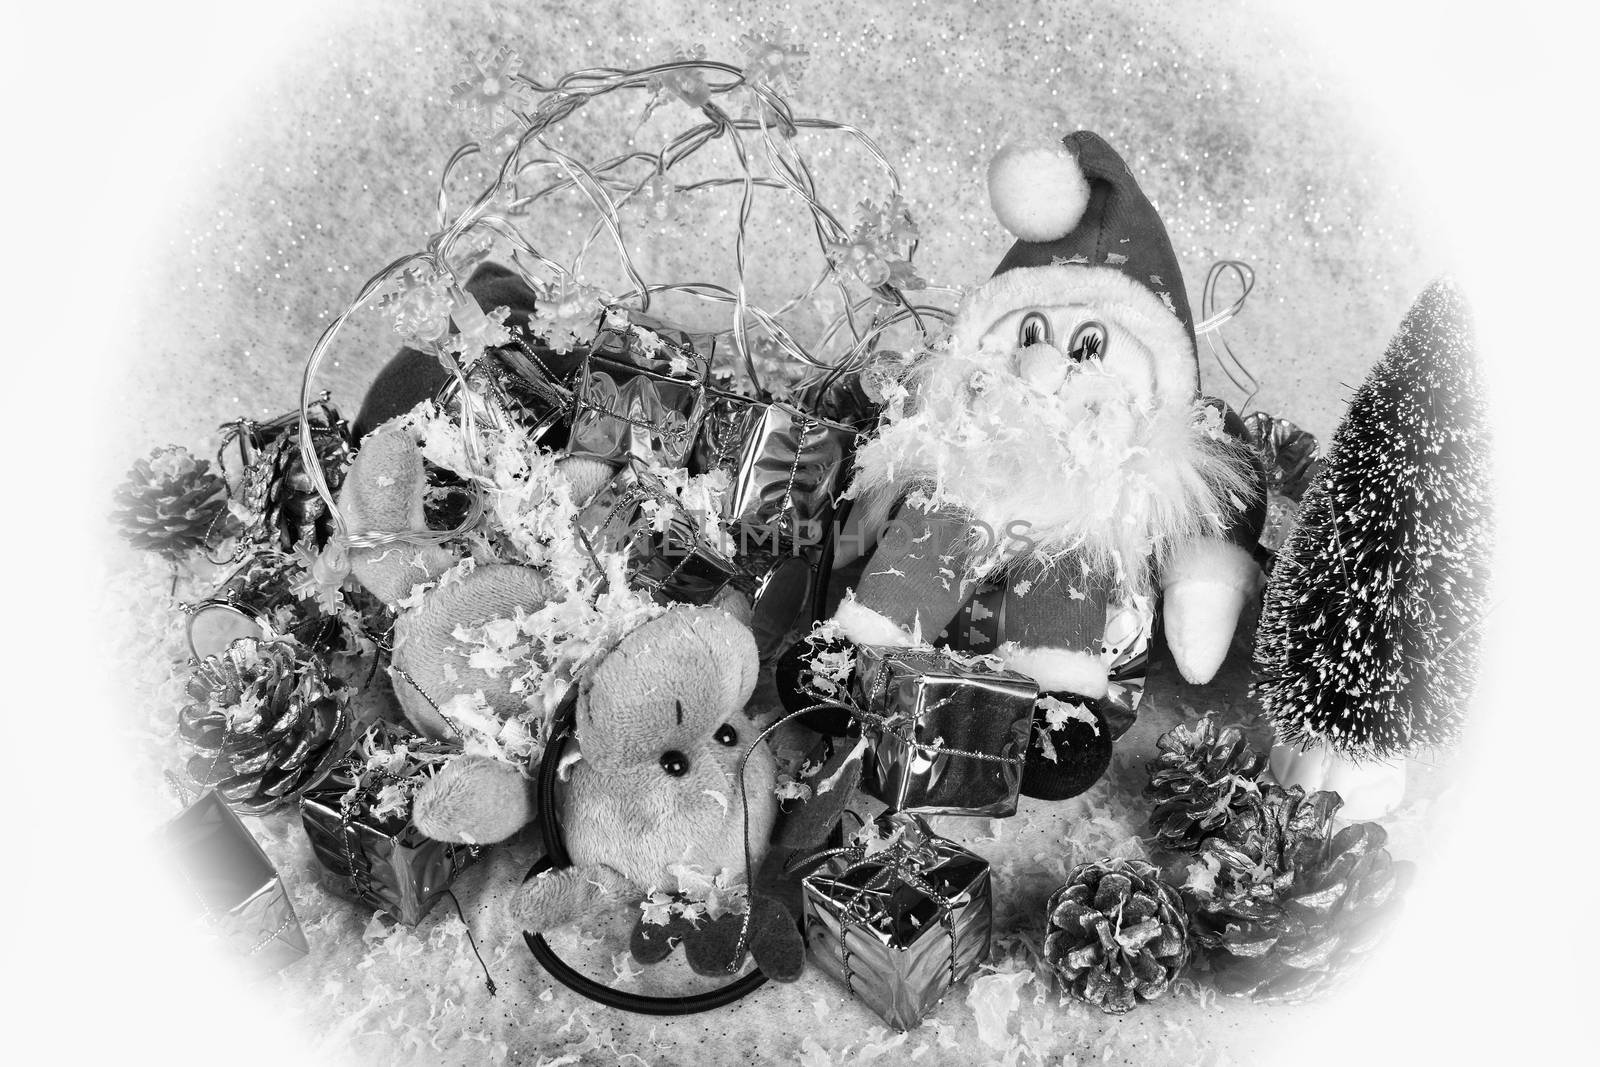 Father Christmas and Rudolph collapsed exhausted during the Christmas festival black and white monochrome image stock photo